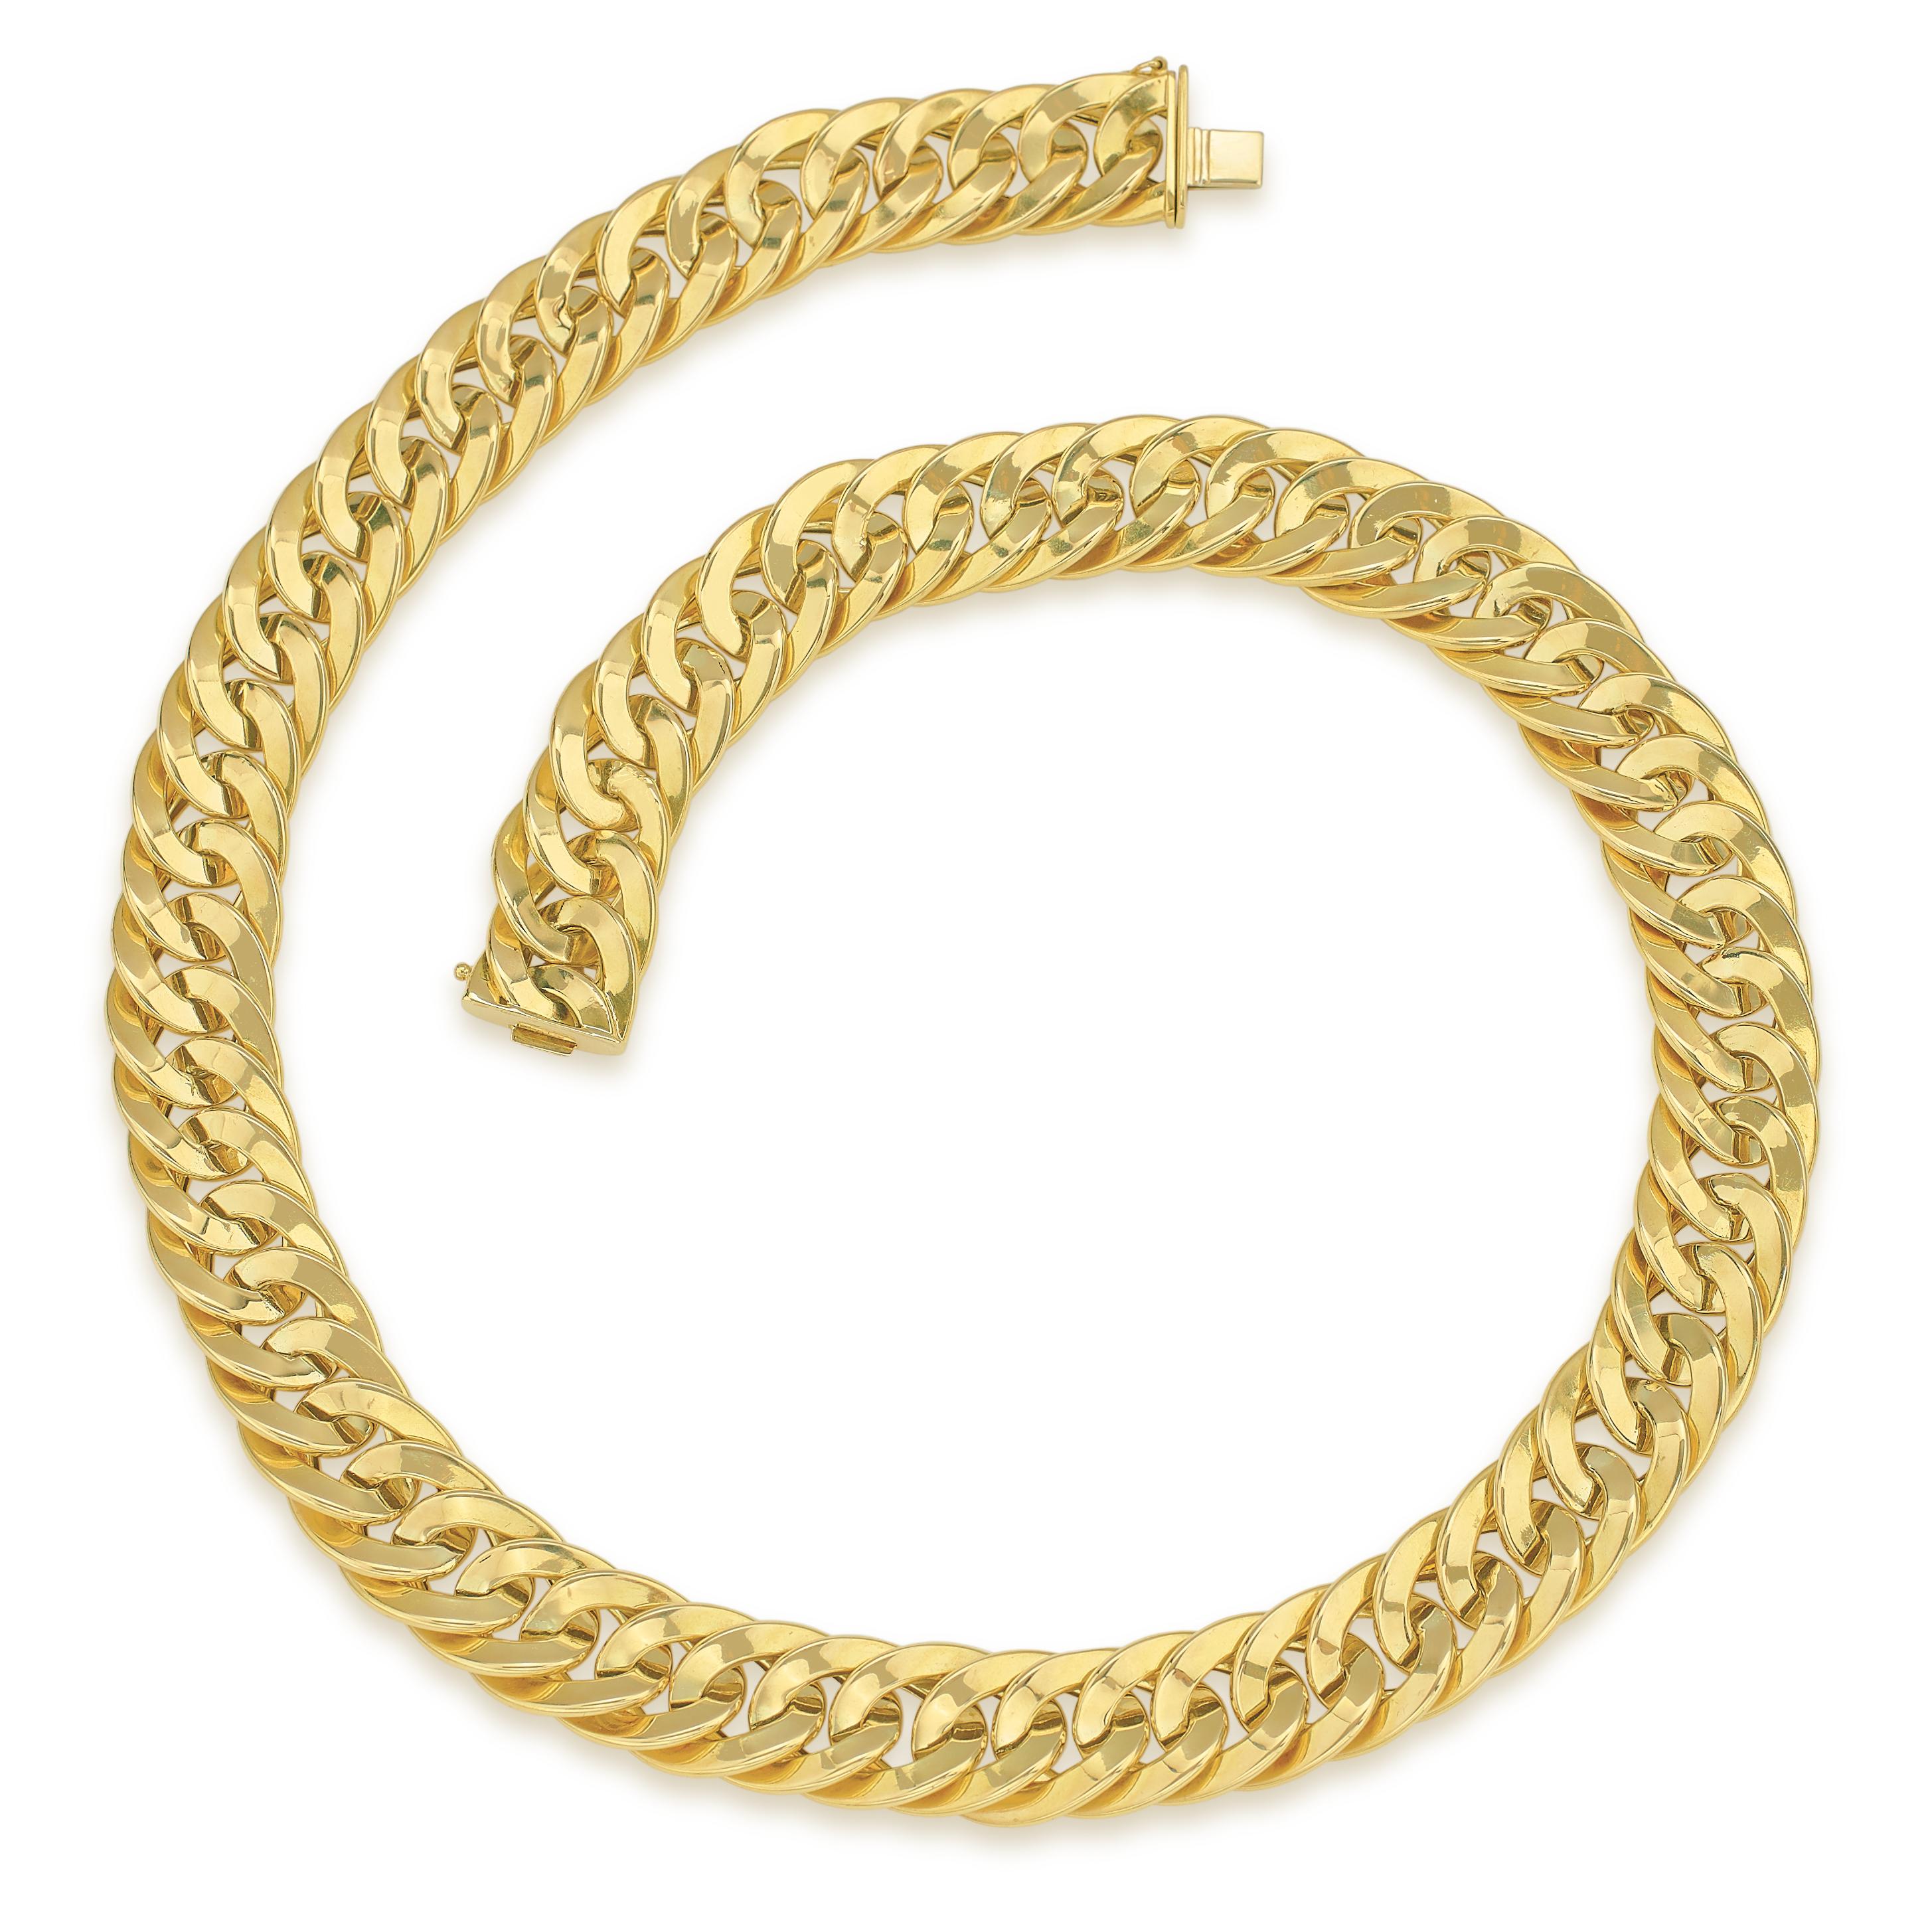 This 13.32mm Italian 18k yellow gold doublle curb link necklace is thick gauge, hollowed for comfort and wearability, measures at 24